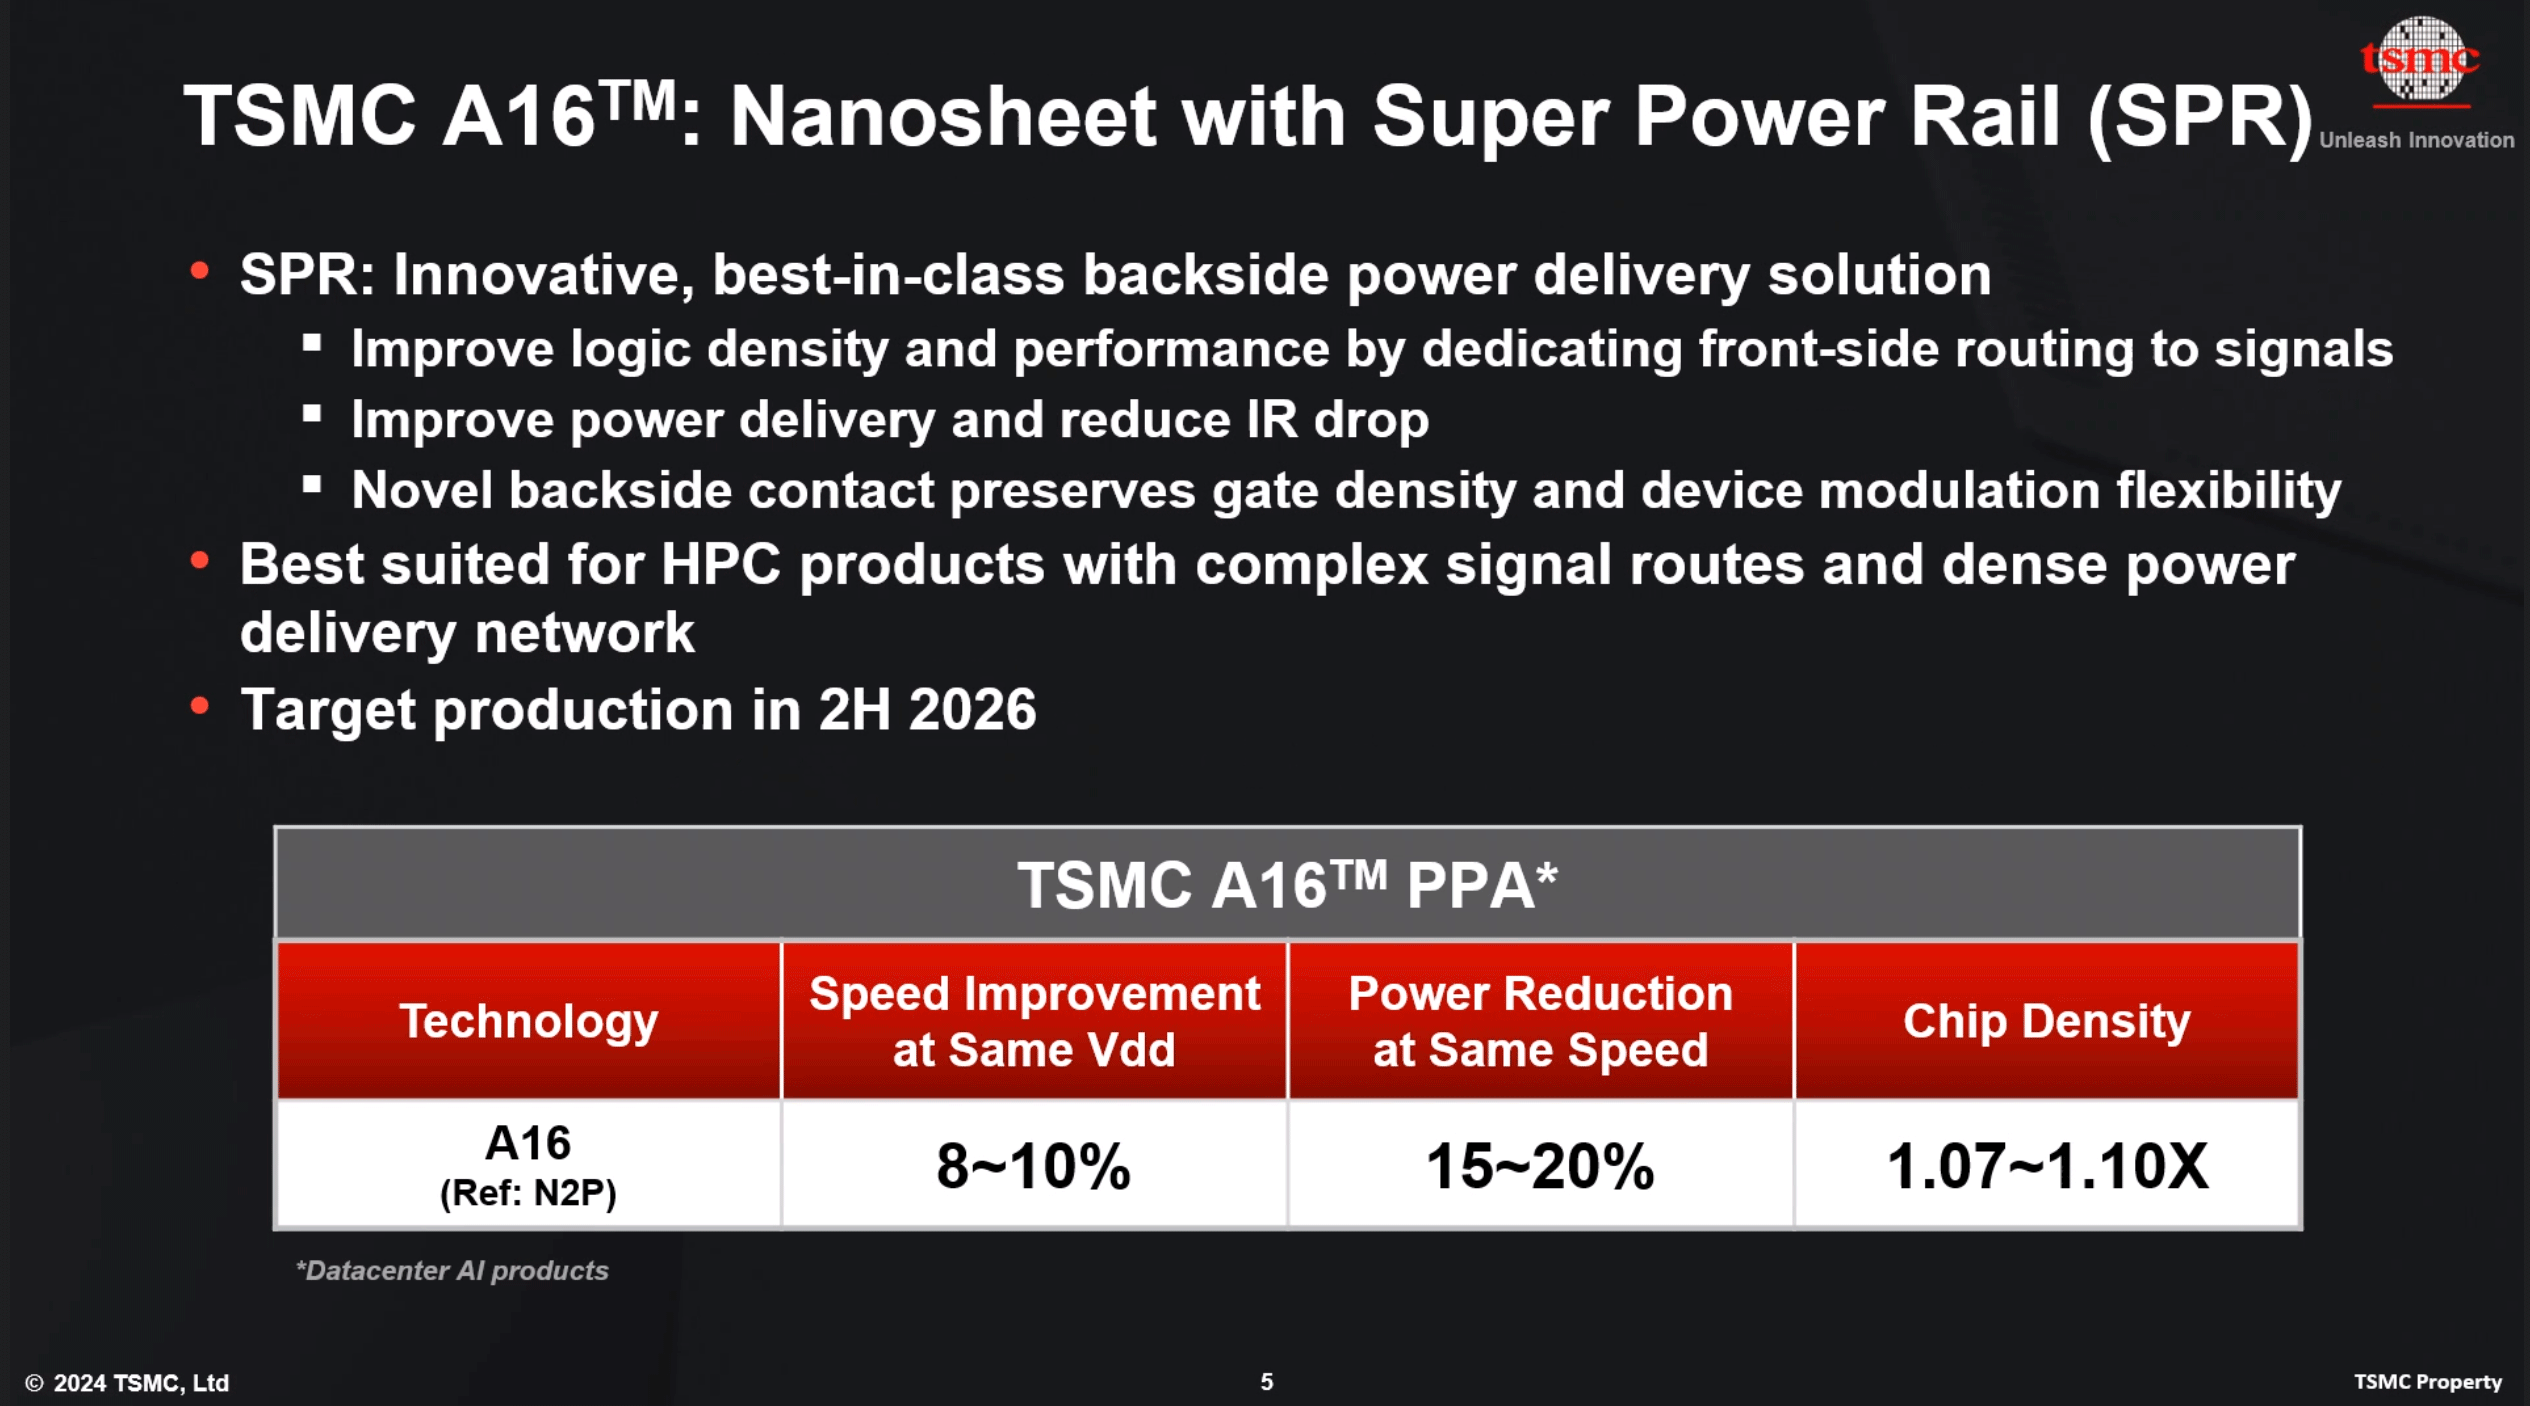 TSMC’s 1.6nm Technology Announced for Late 2026: A16 with “Super Power Rail” Backside Power